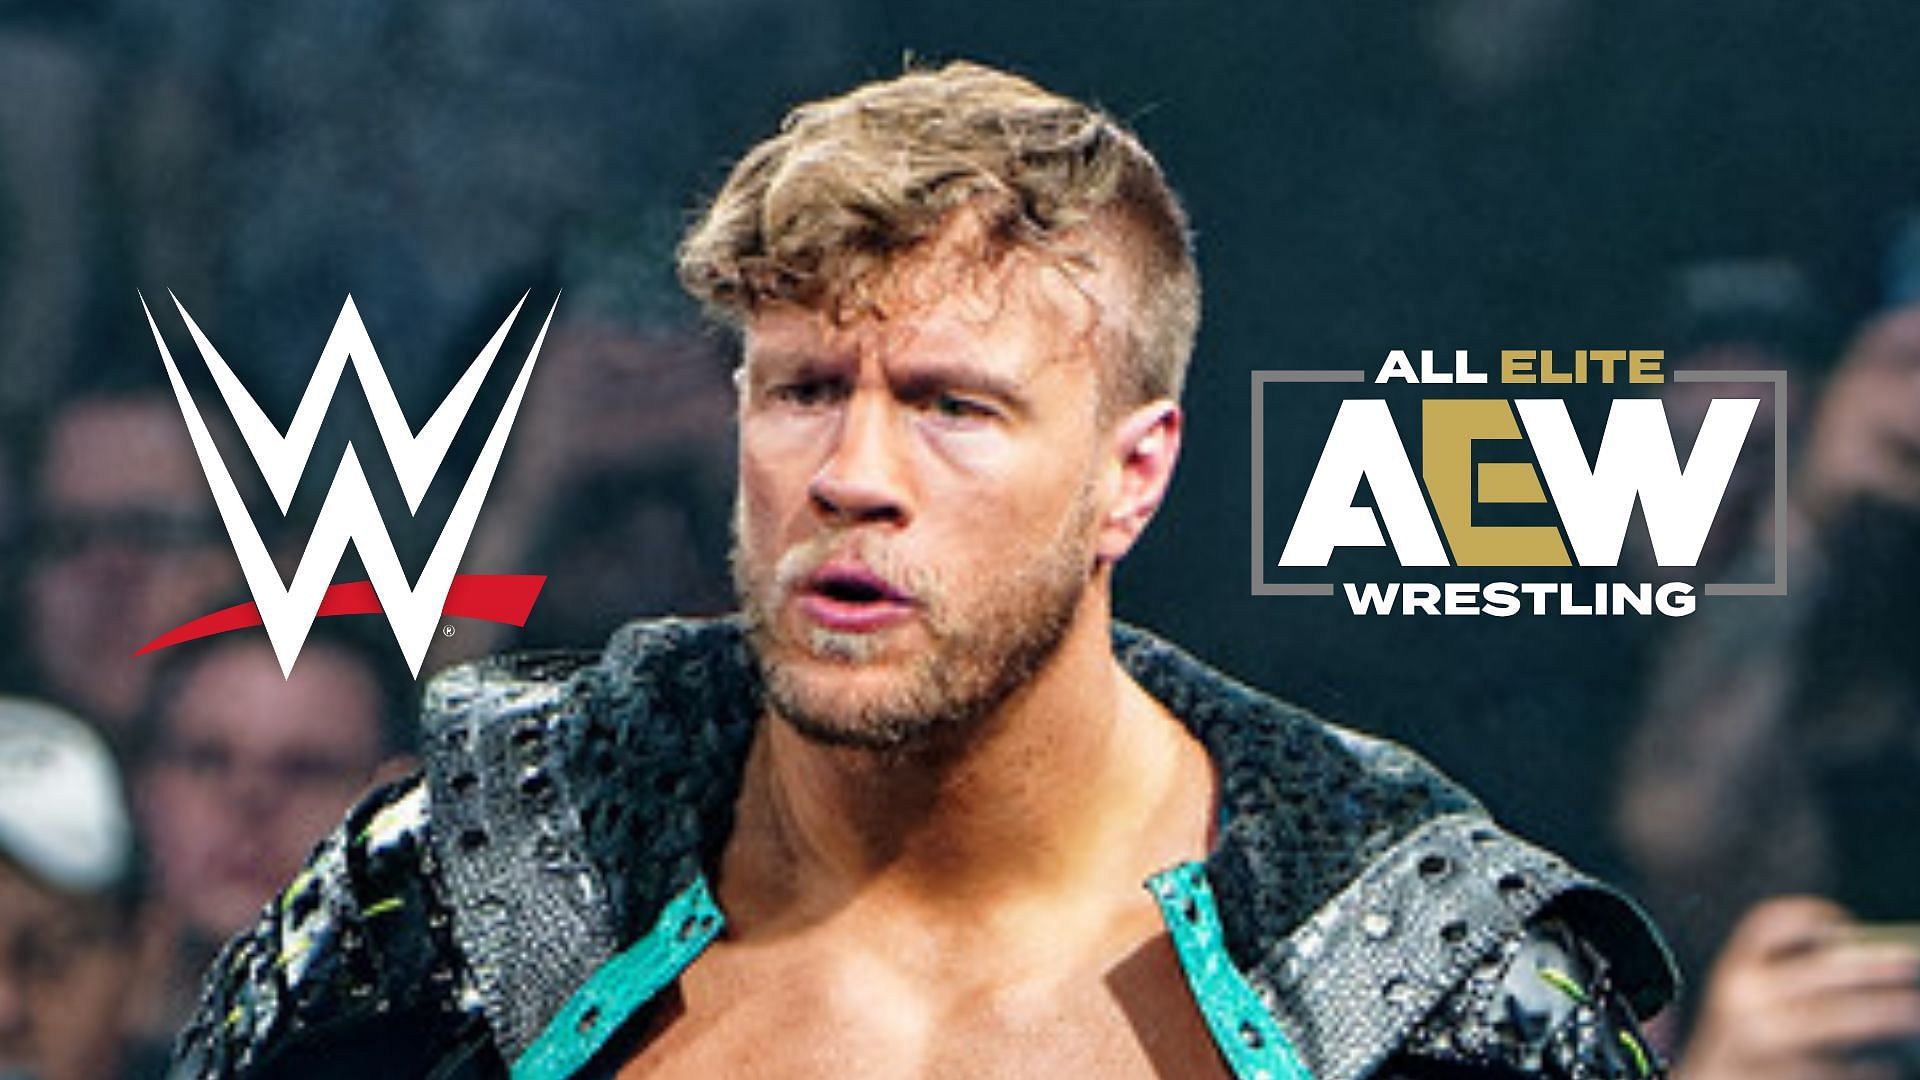 Is Will Ospreay going to join AEW or WWE?